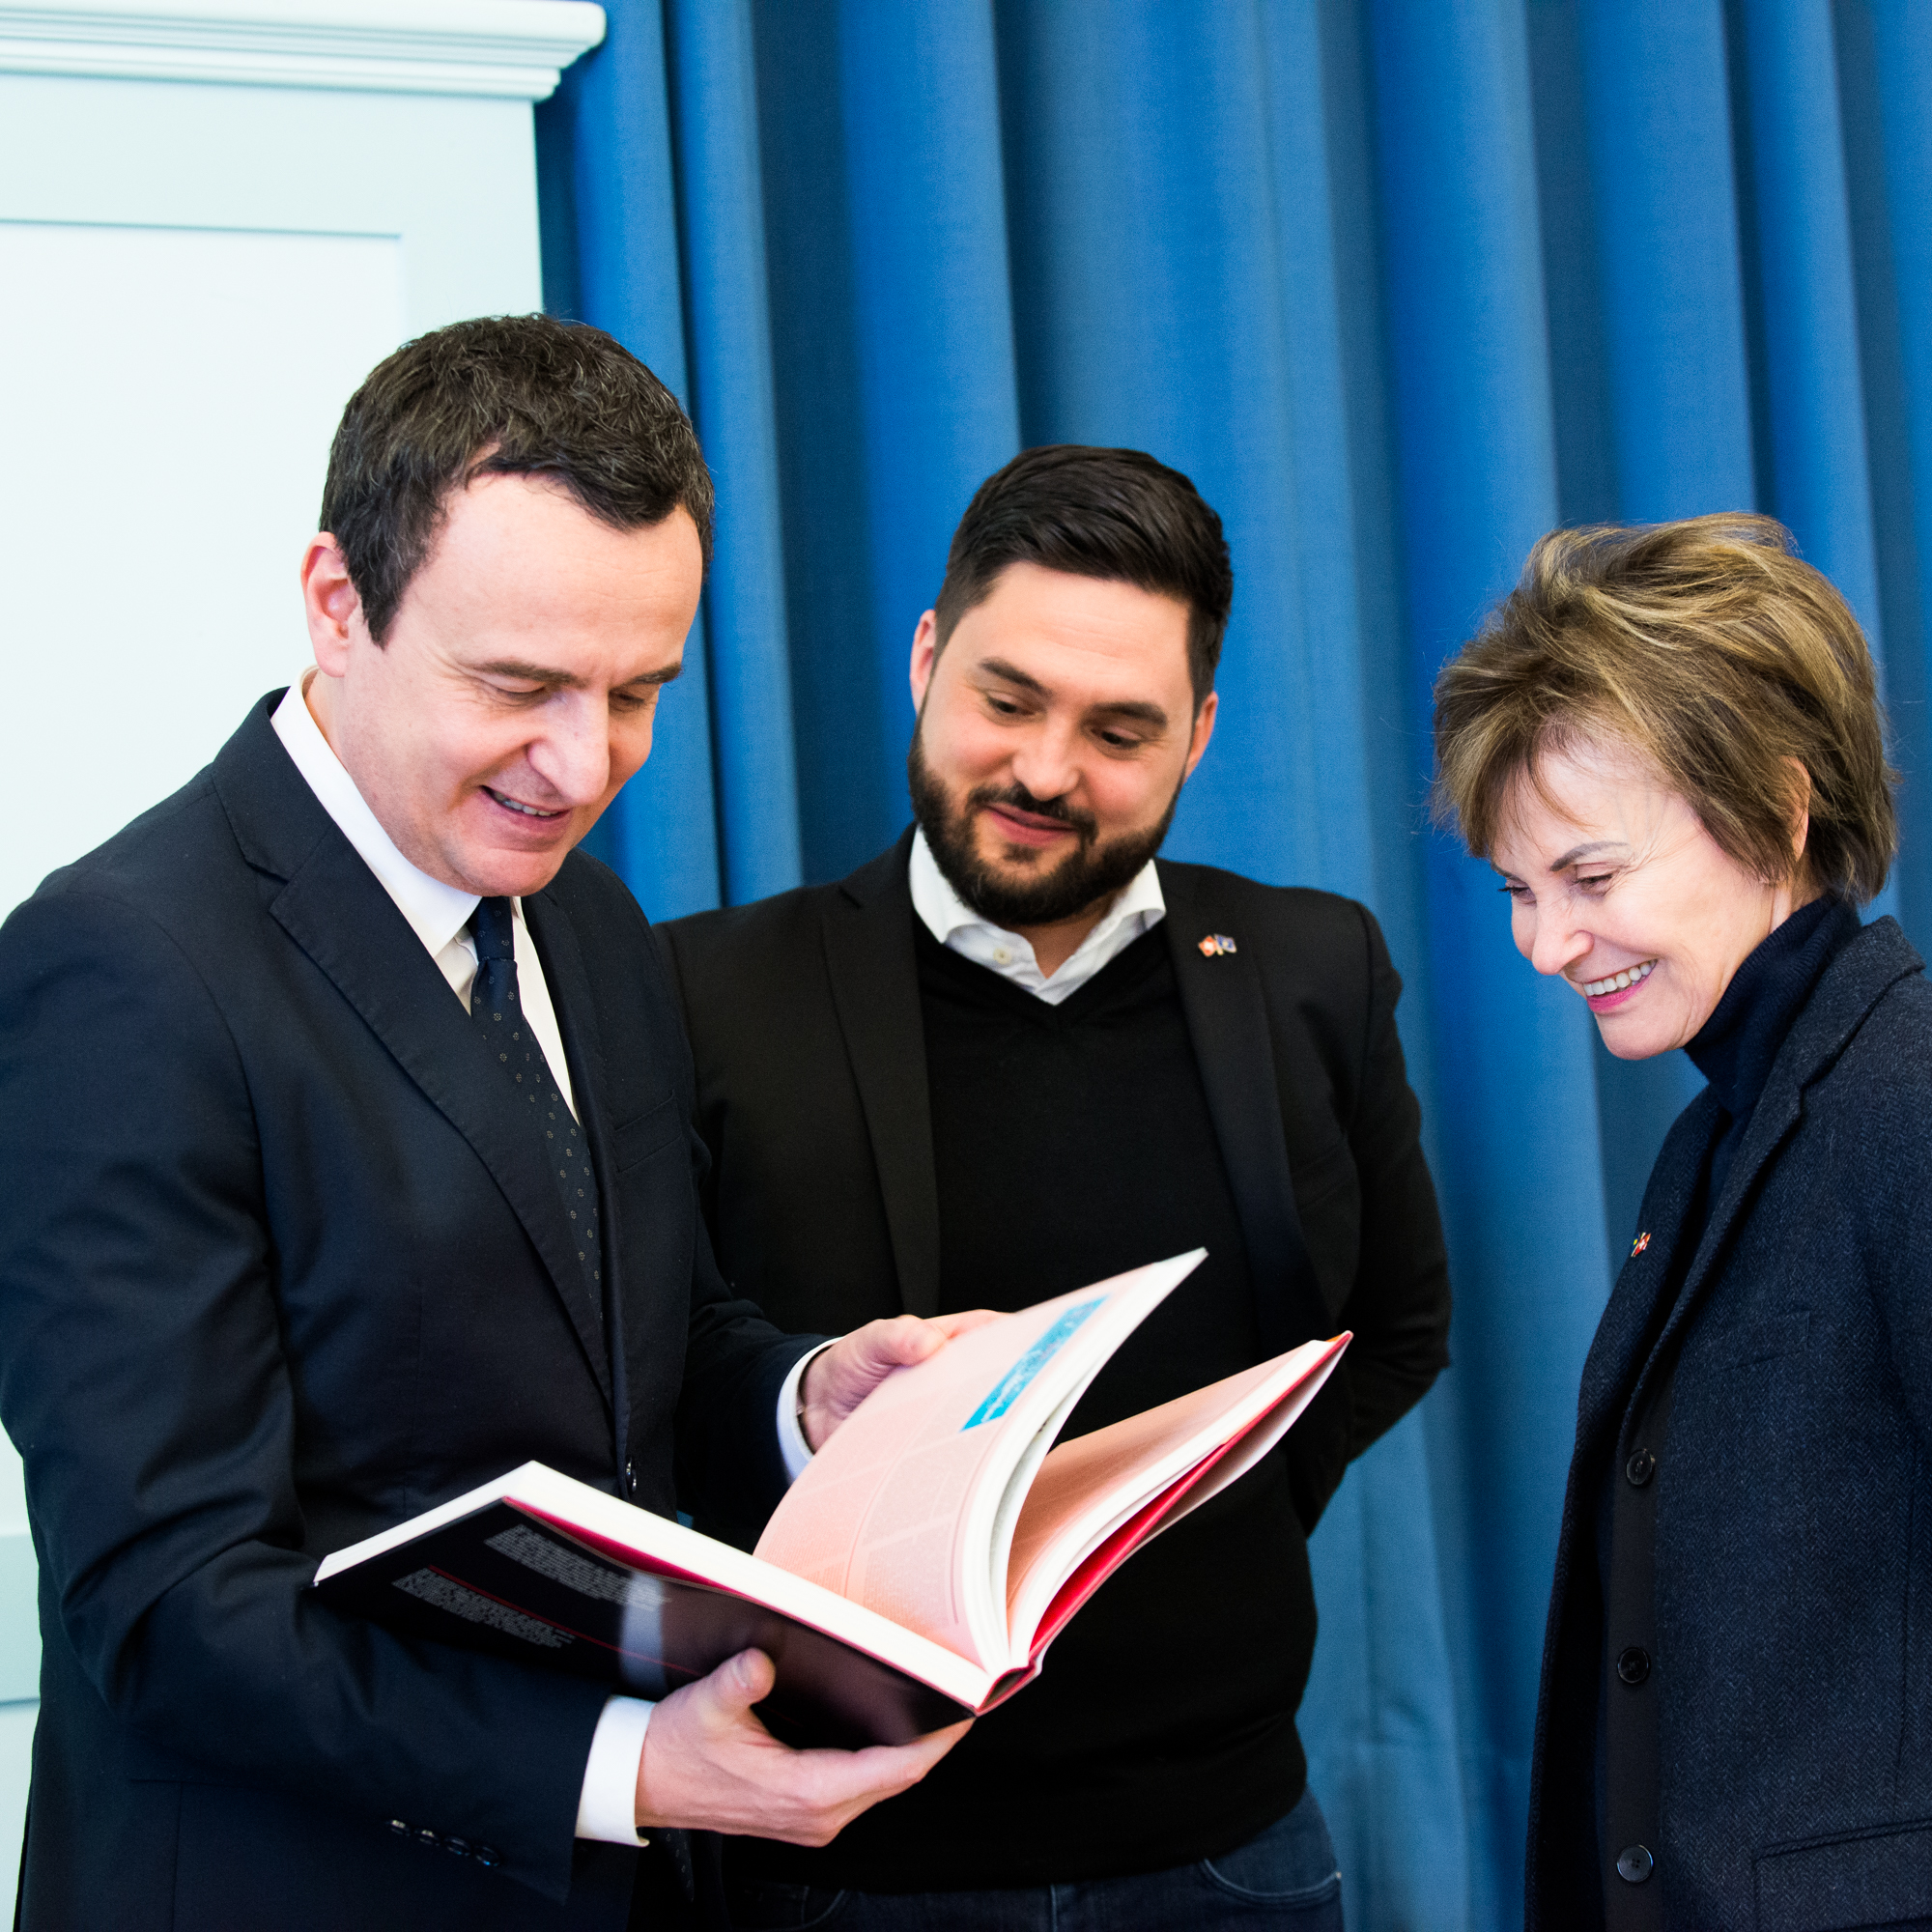 Three politicians look into a kind of guest book.